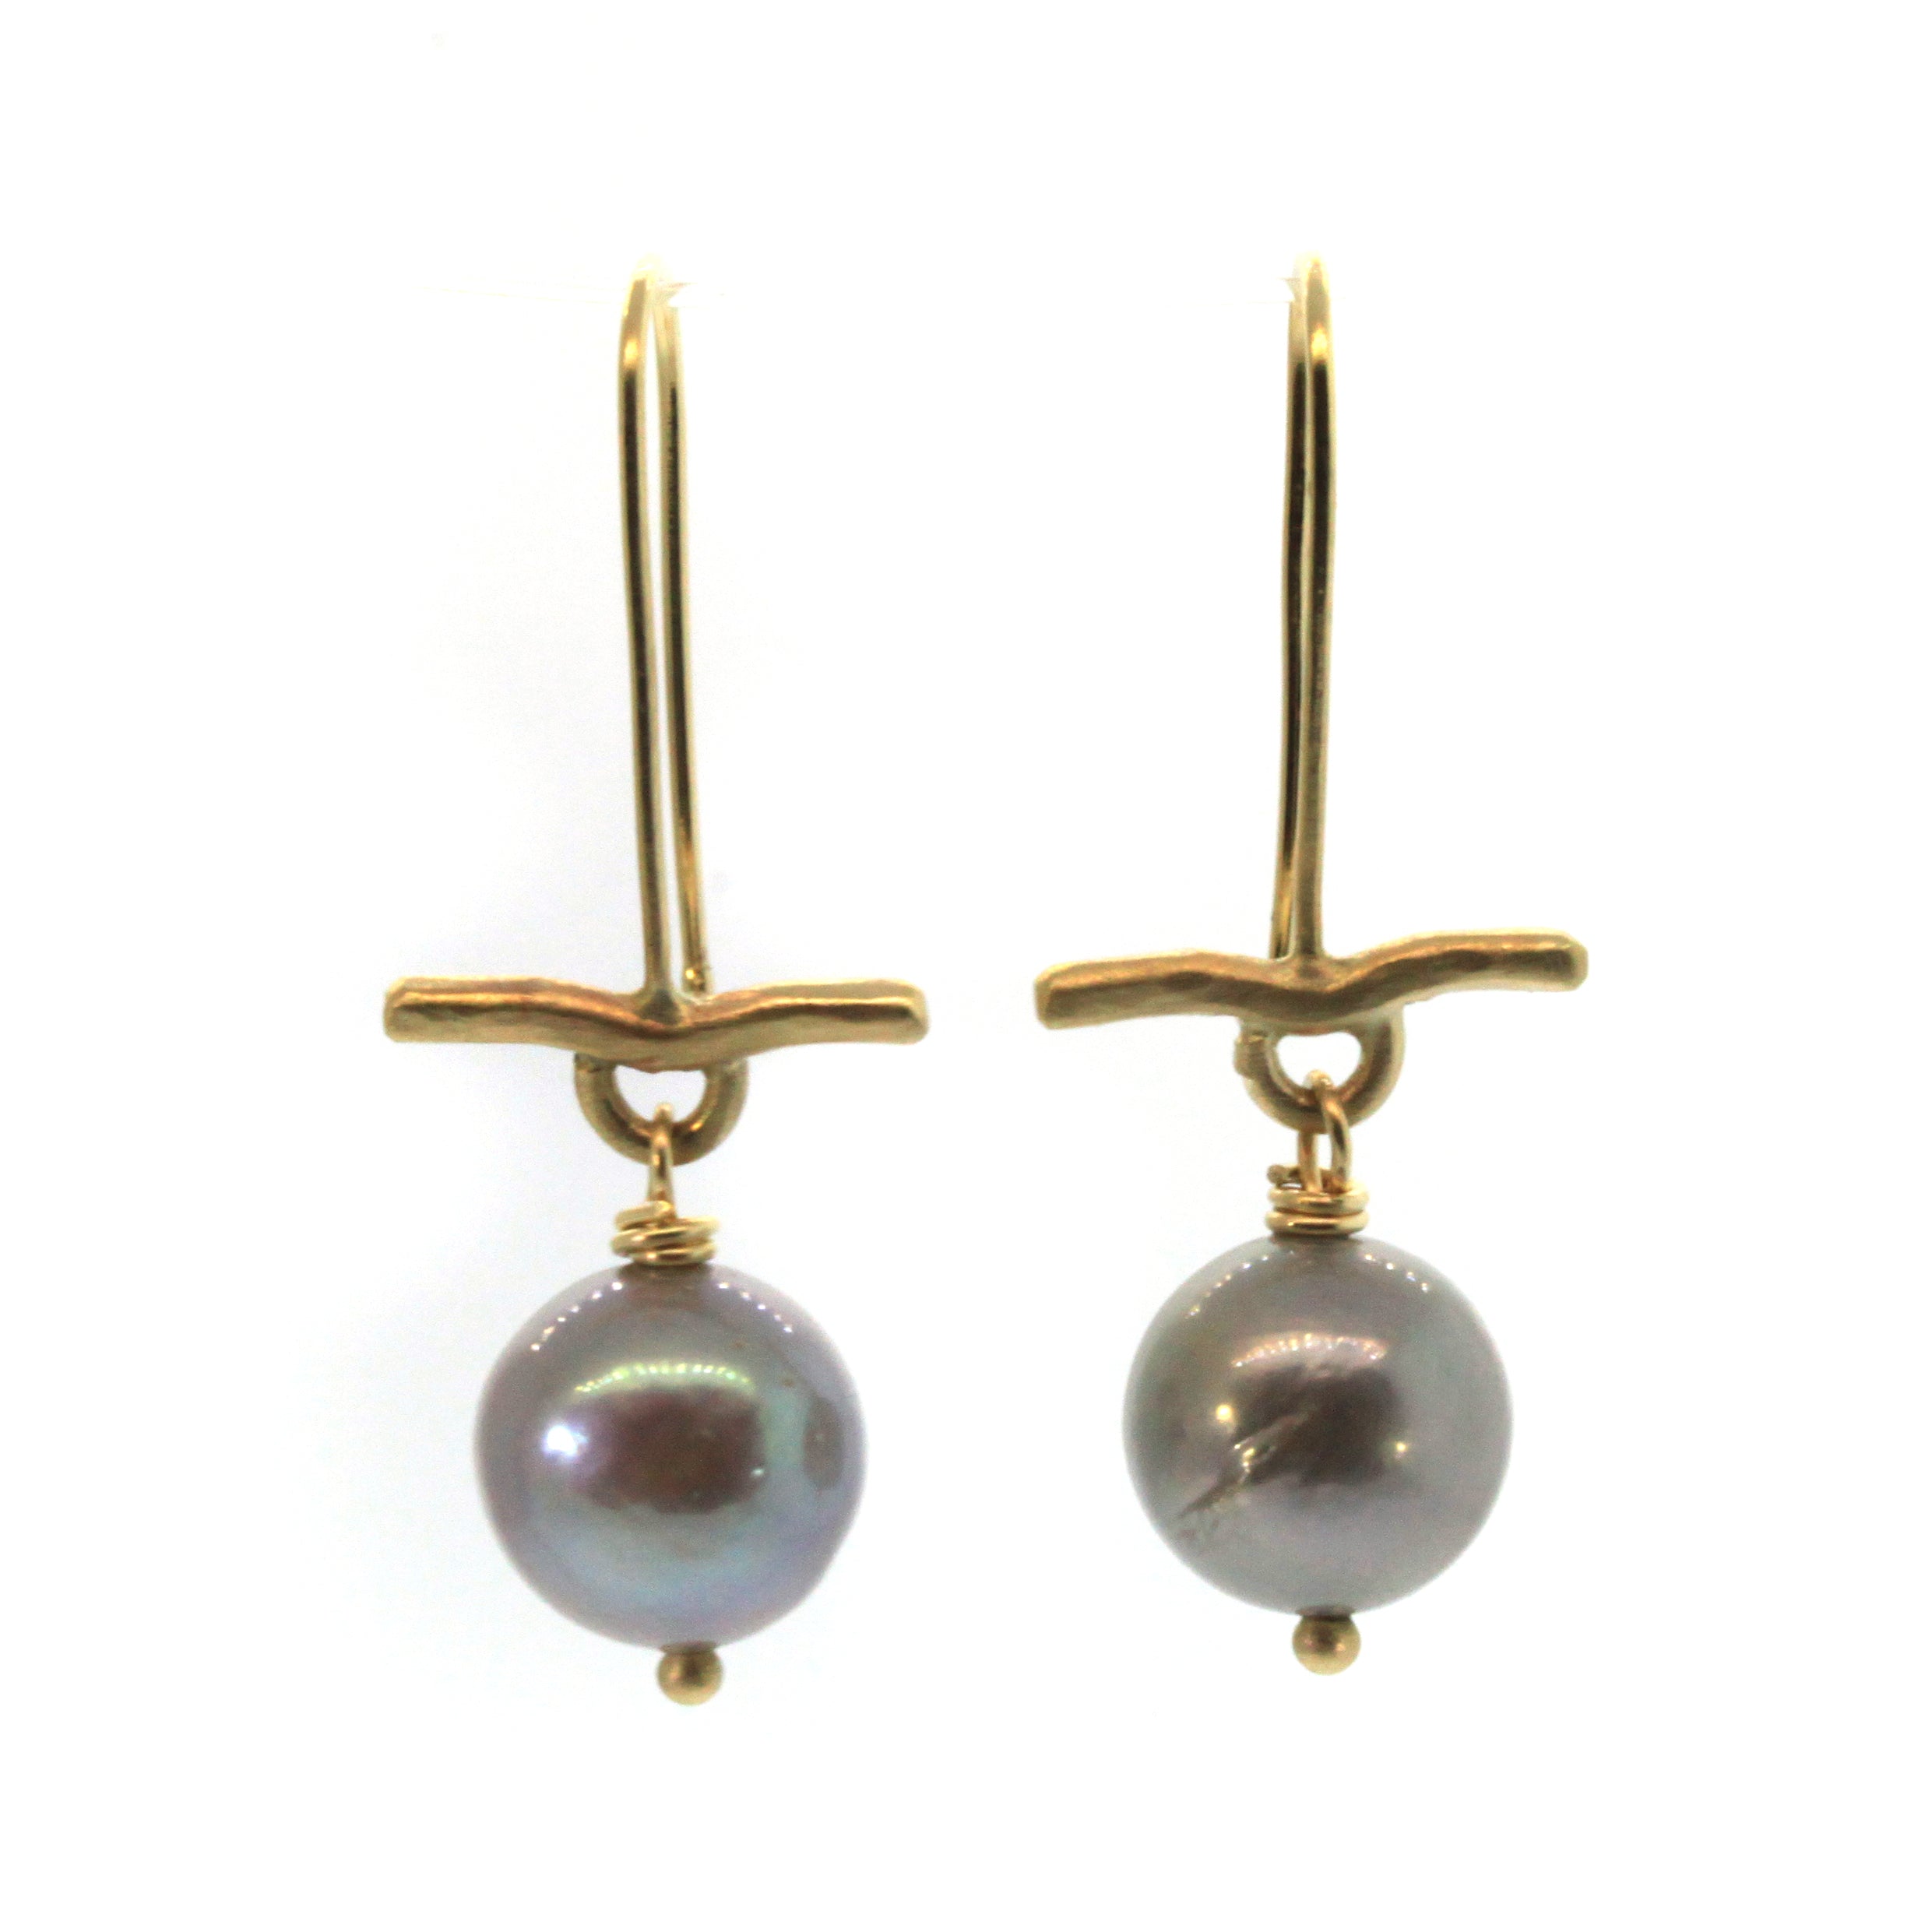 These Pearl & Gold Bar Earrings were handcrafted in Houston, Texas at Rebecca Lankford Designs. This pair features two round grey pearls accented by a textured yellow gold bar dangling from yellow gold ear wire.